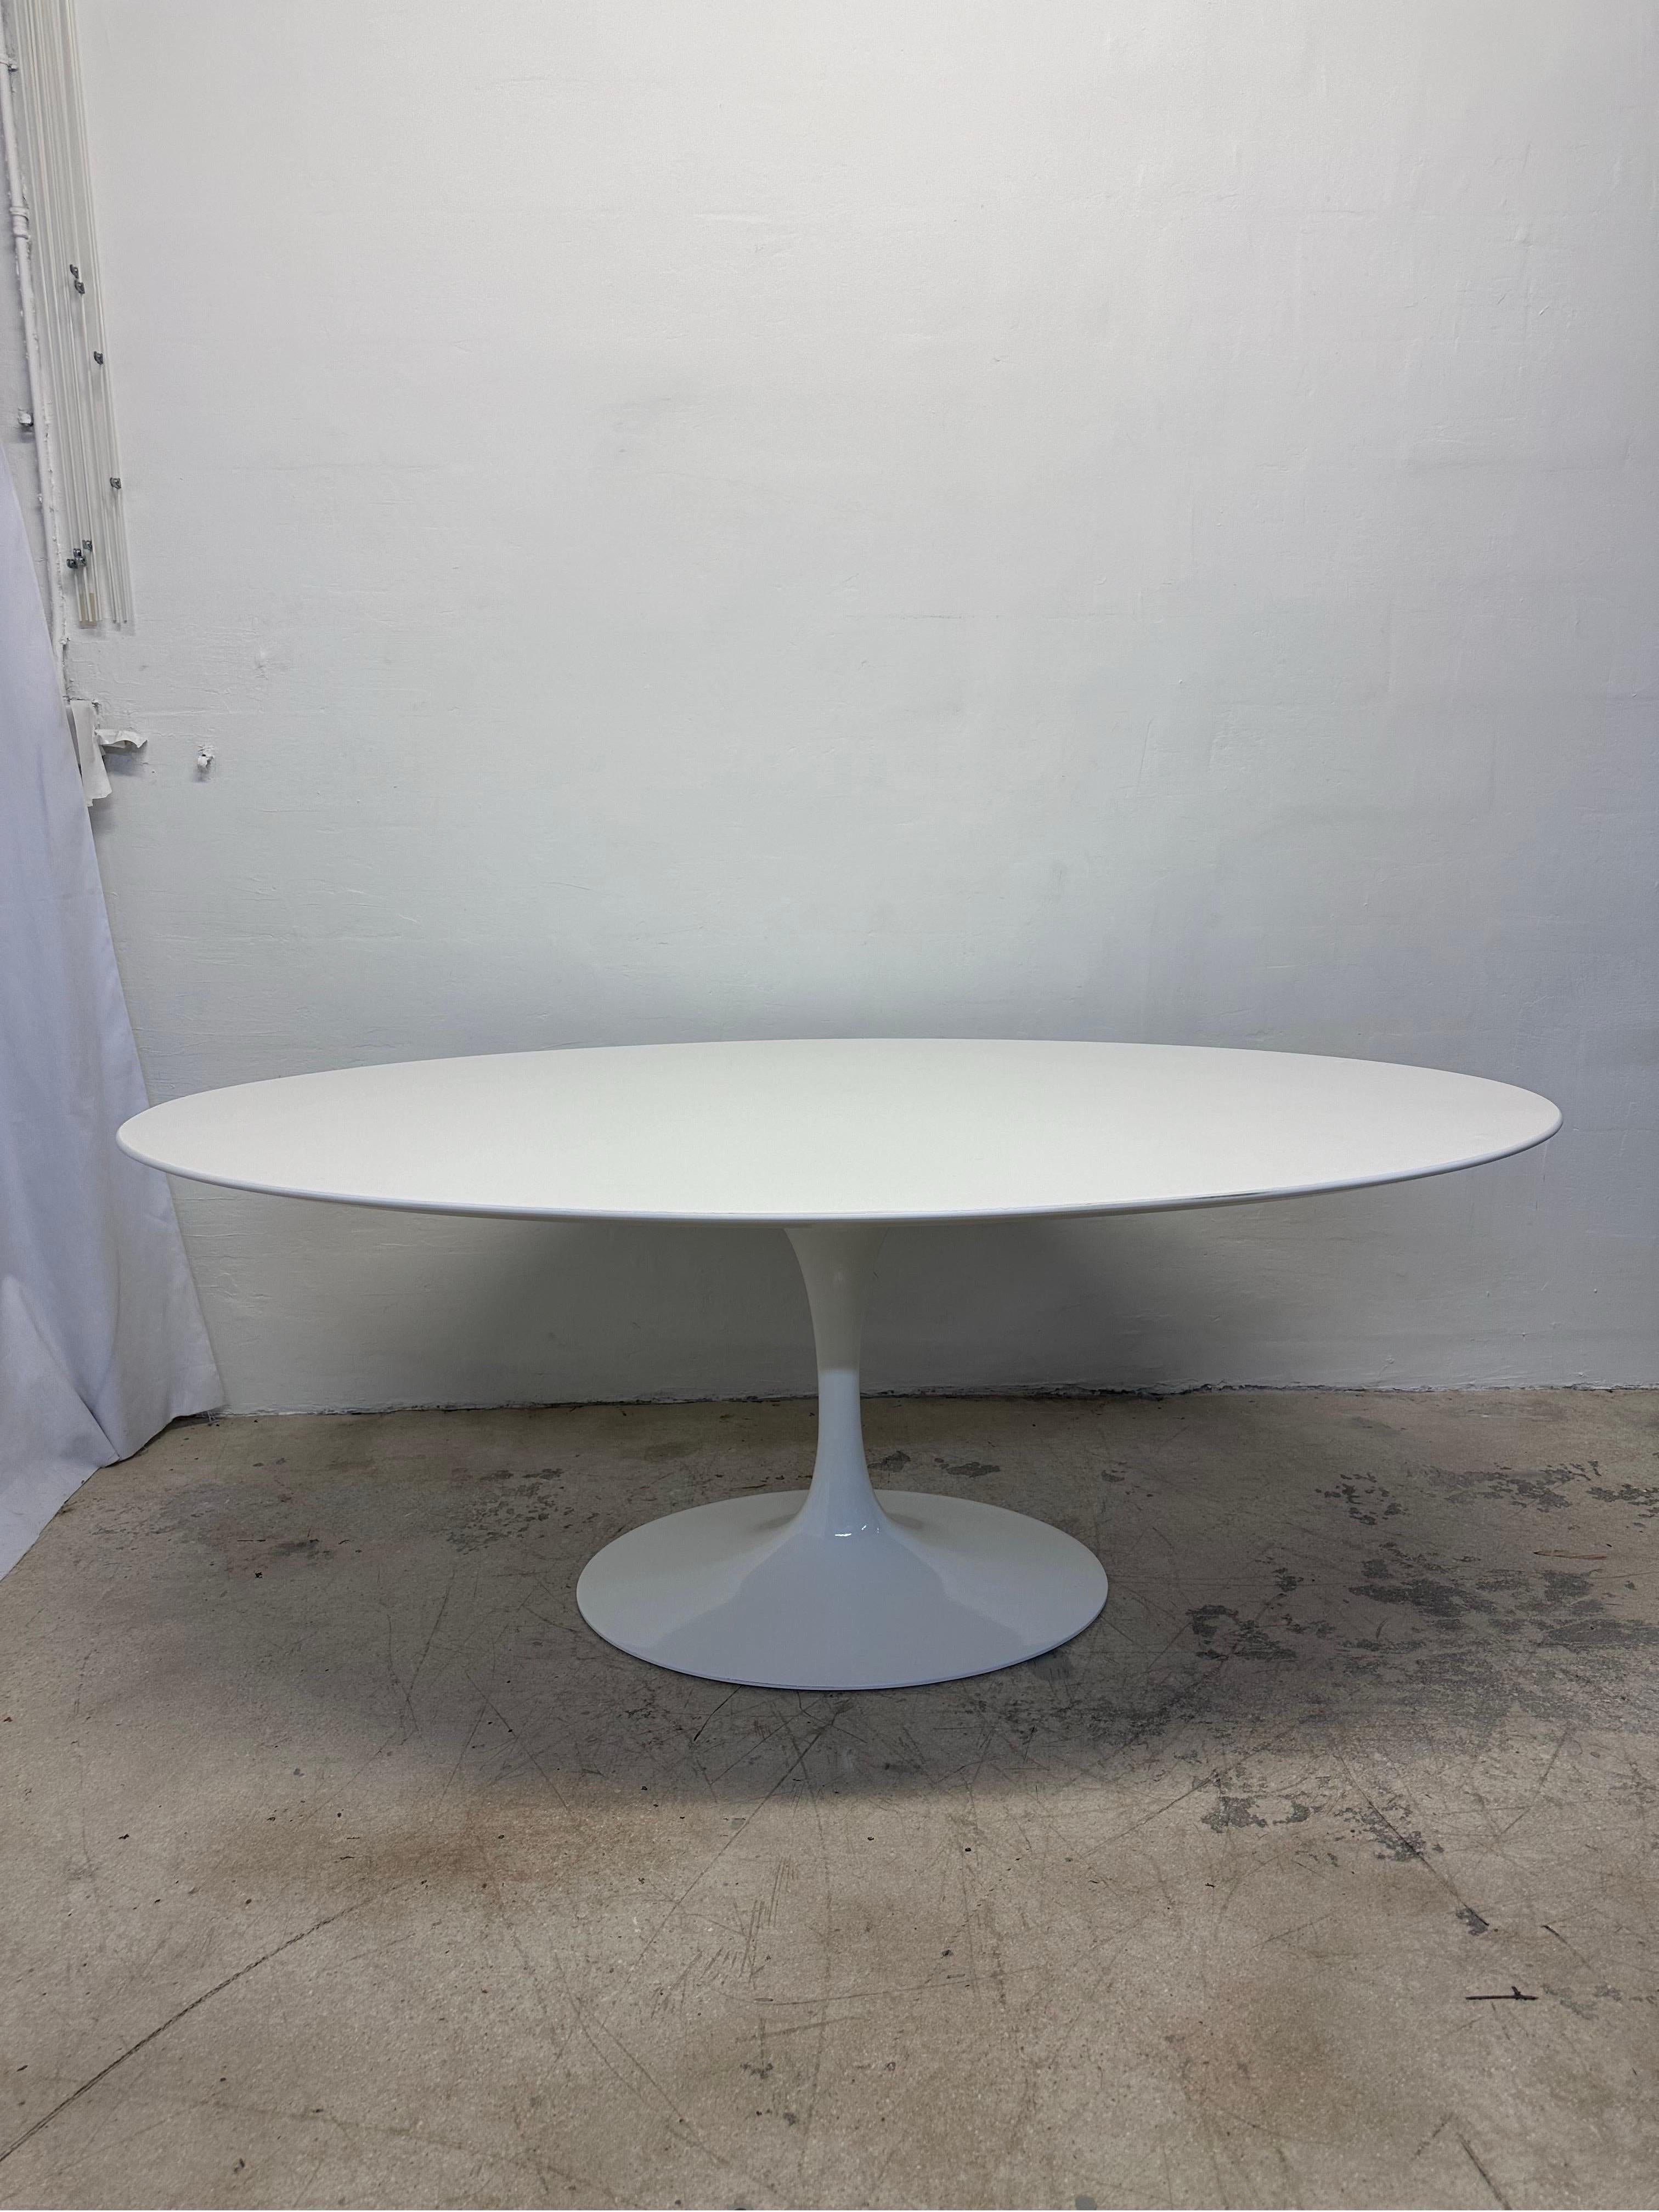 White laminate oval 78” top with white lacquered tulip pedestal base dining or center table designed by Eero Saarinen and manufactured by Knoll International. Maintains Knoll label.  Edges and top show wear and loss.